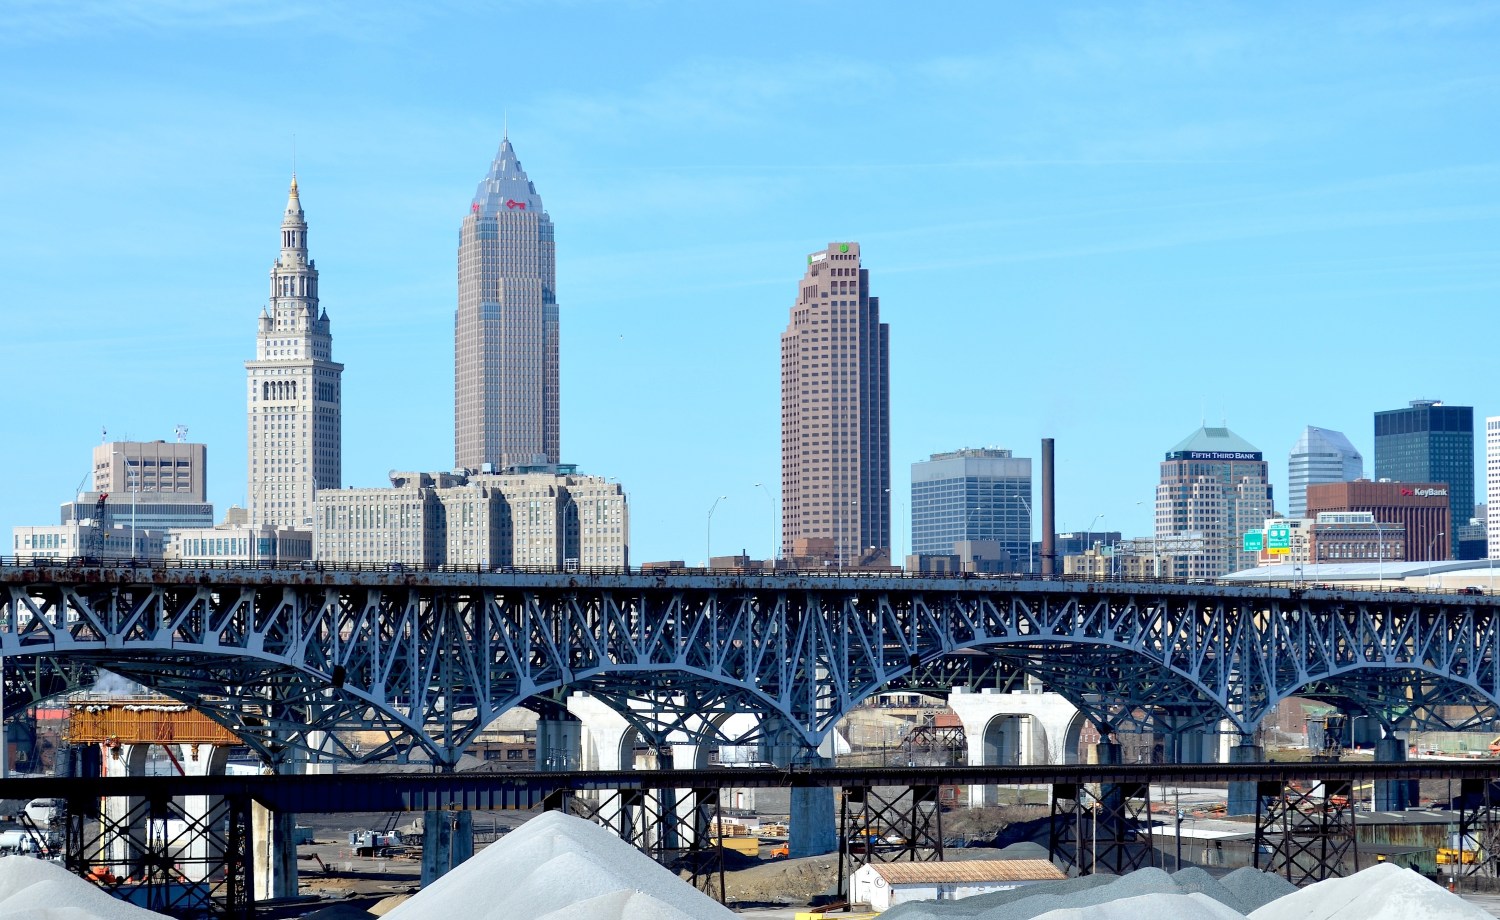 WIKIMEDIA COMMONS/Aeroplanepics0112 - Downtown Cleveland as viewed from The Tremont neighborhood, March 10, 2012.